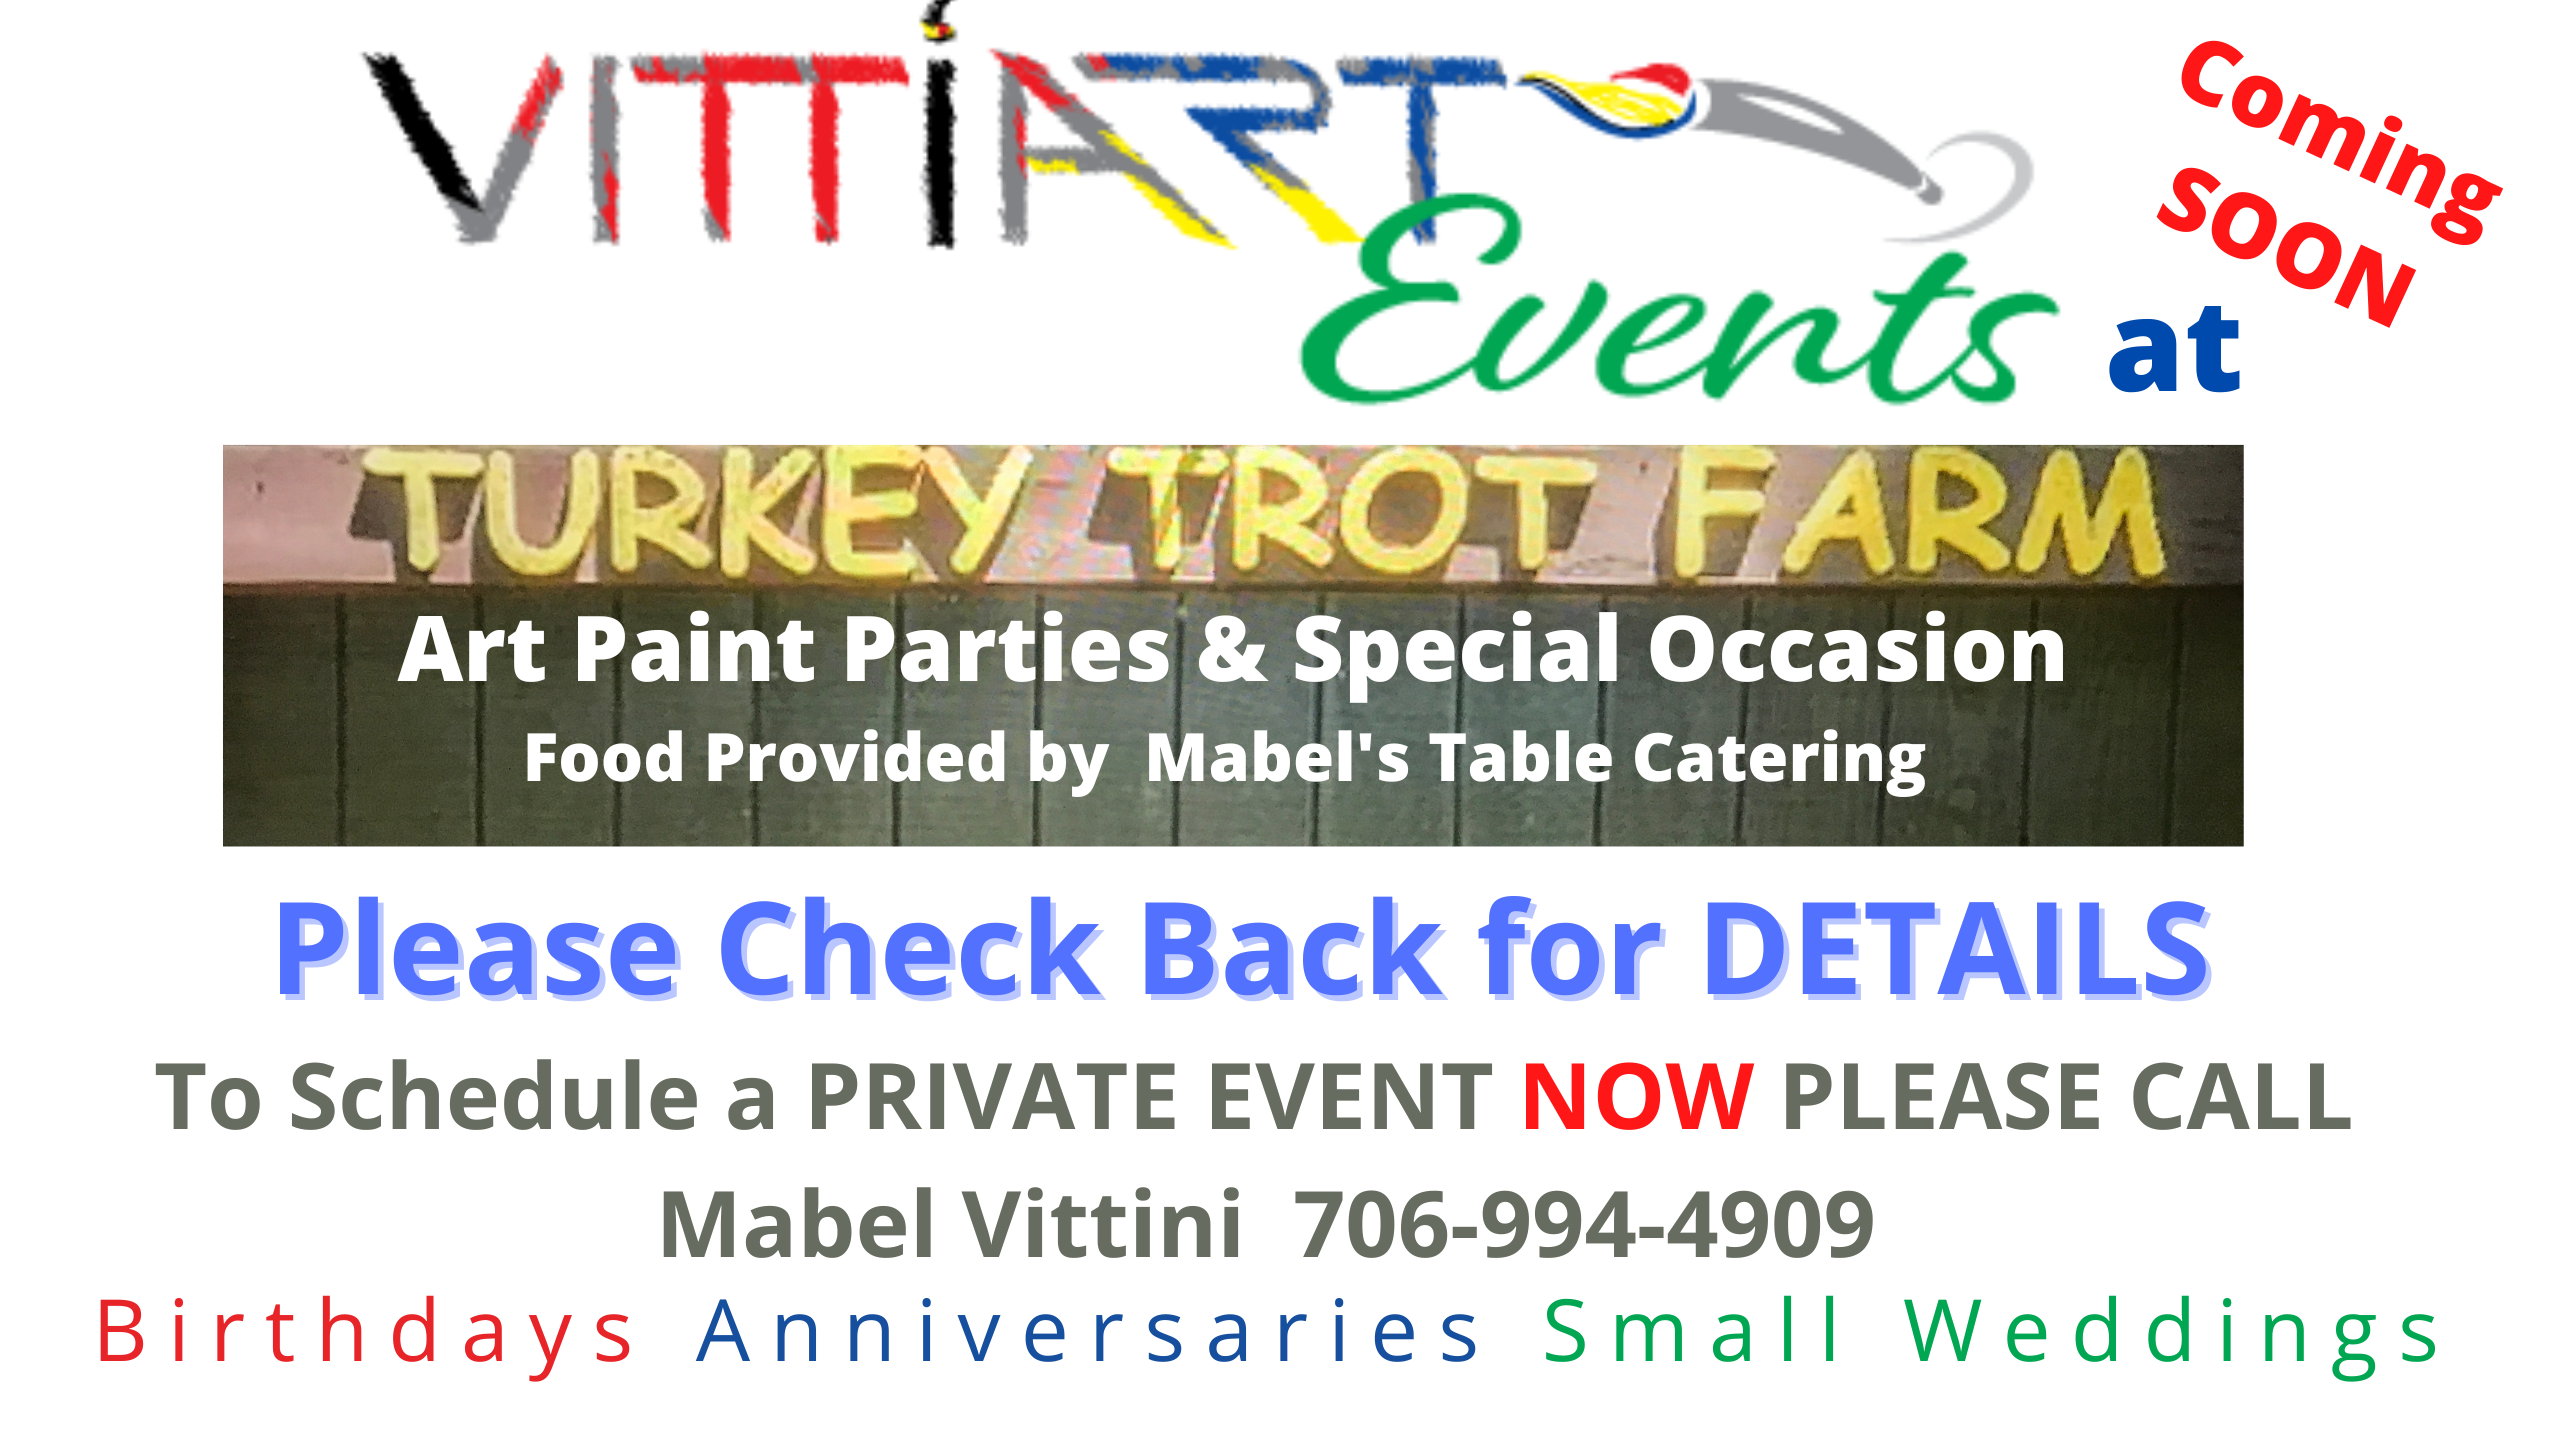 Art Events for special occasions at Turkey Trot Farm by Vitti Art Events